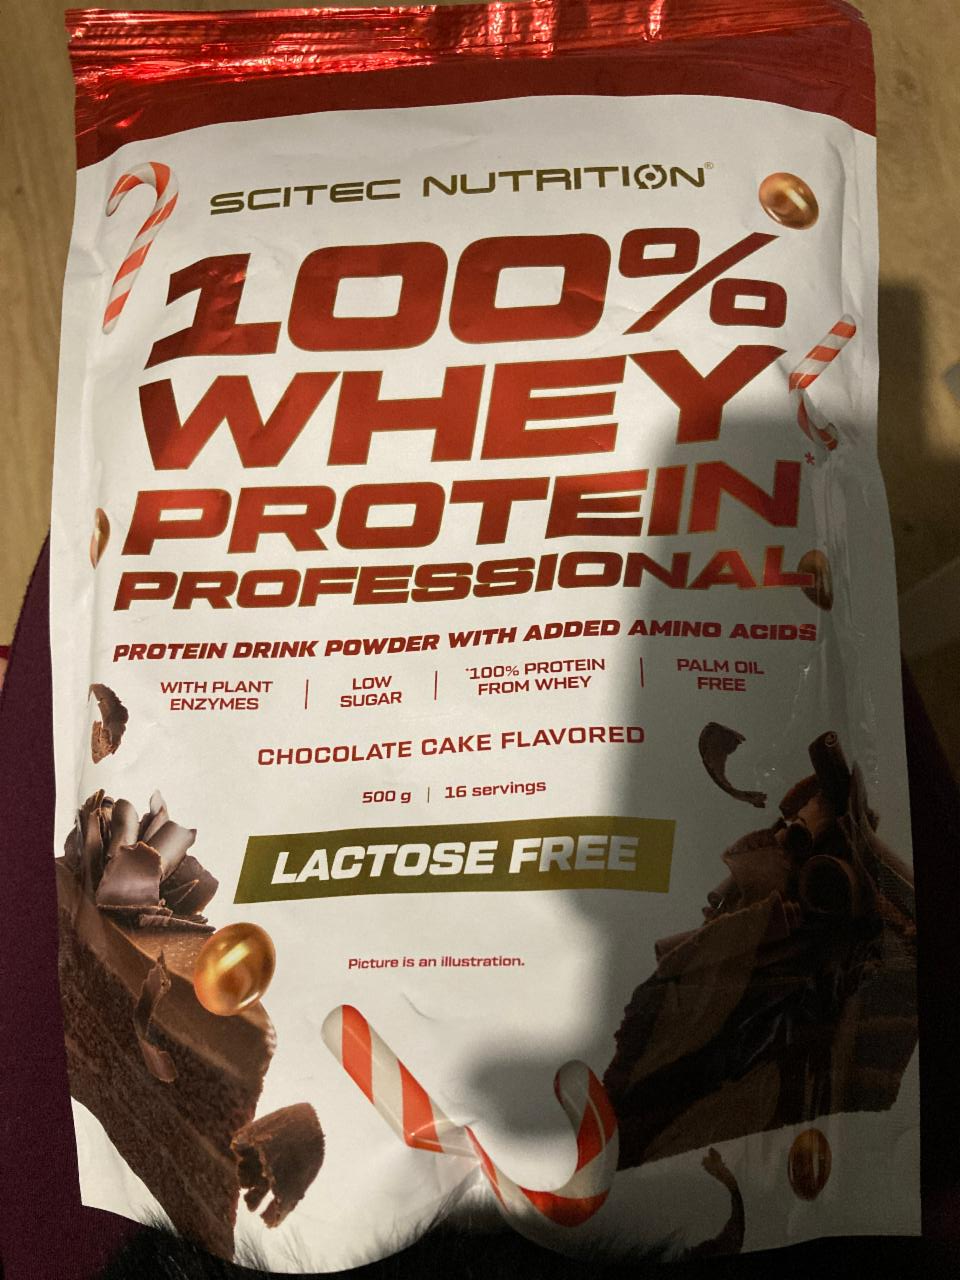 Fotografie - 100% Whey Protein Professional Chocolate Cake lactose free Scitec Nutrition